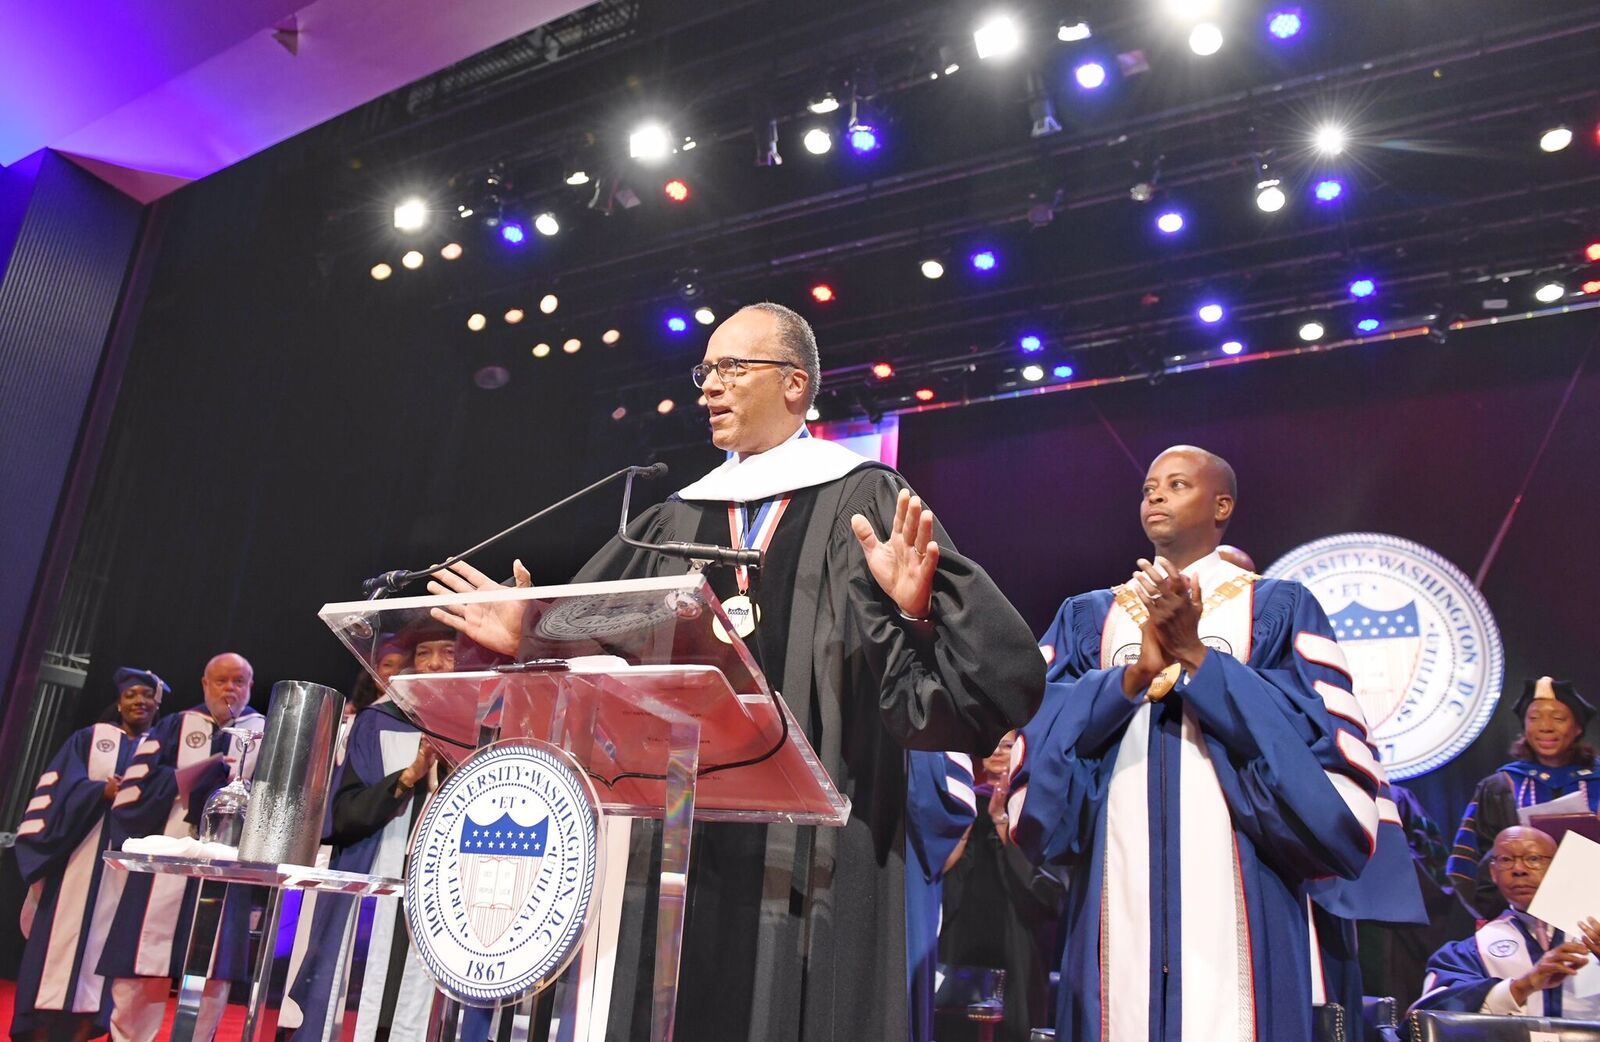 Video: NBC Nightly News Anchor Lester Holt Calls For Dialogue In Convocation Speech